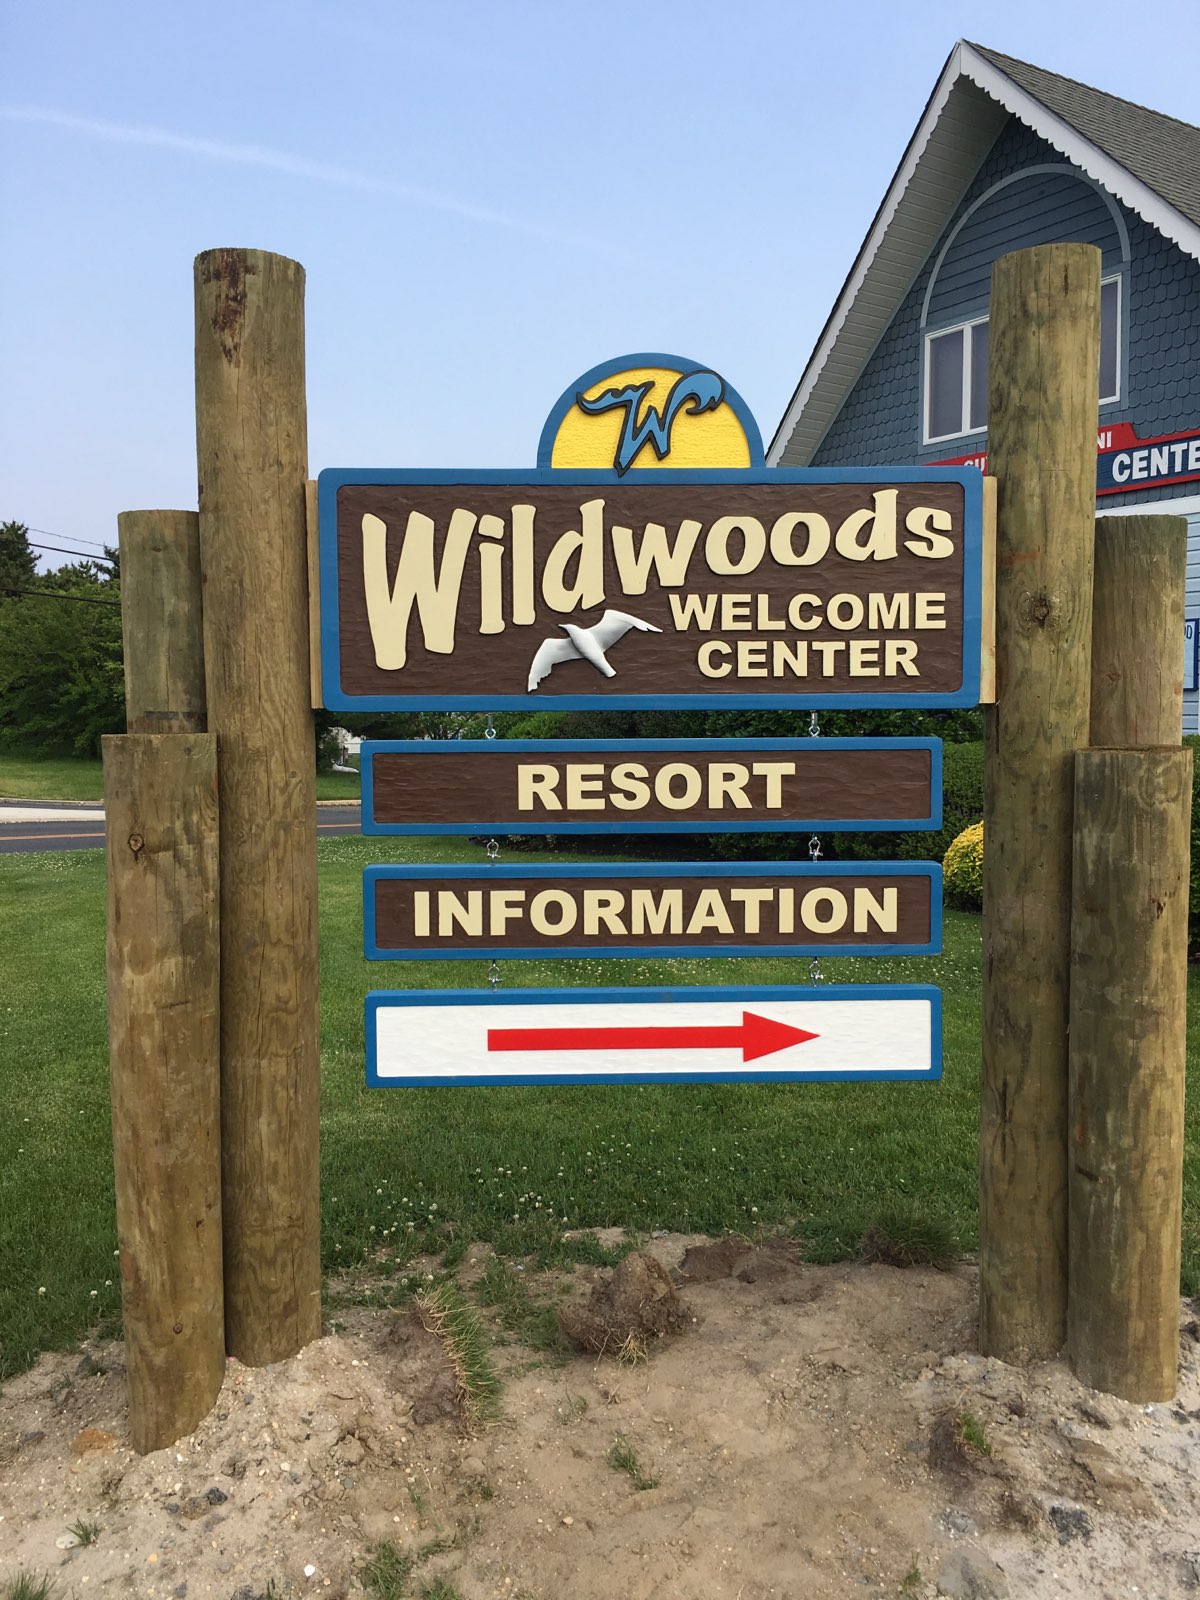 Greater Wildwood Hotel and Motel Association